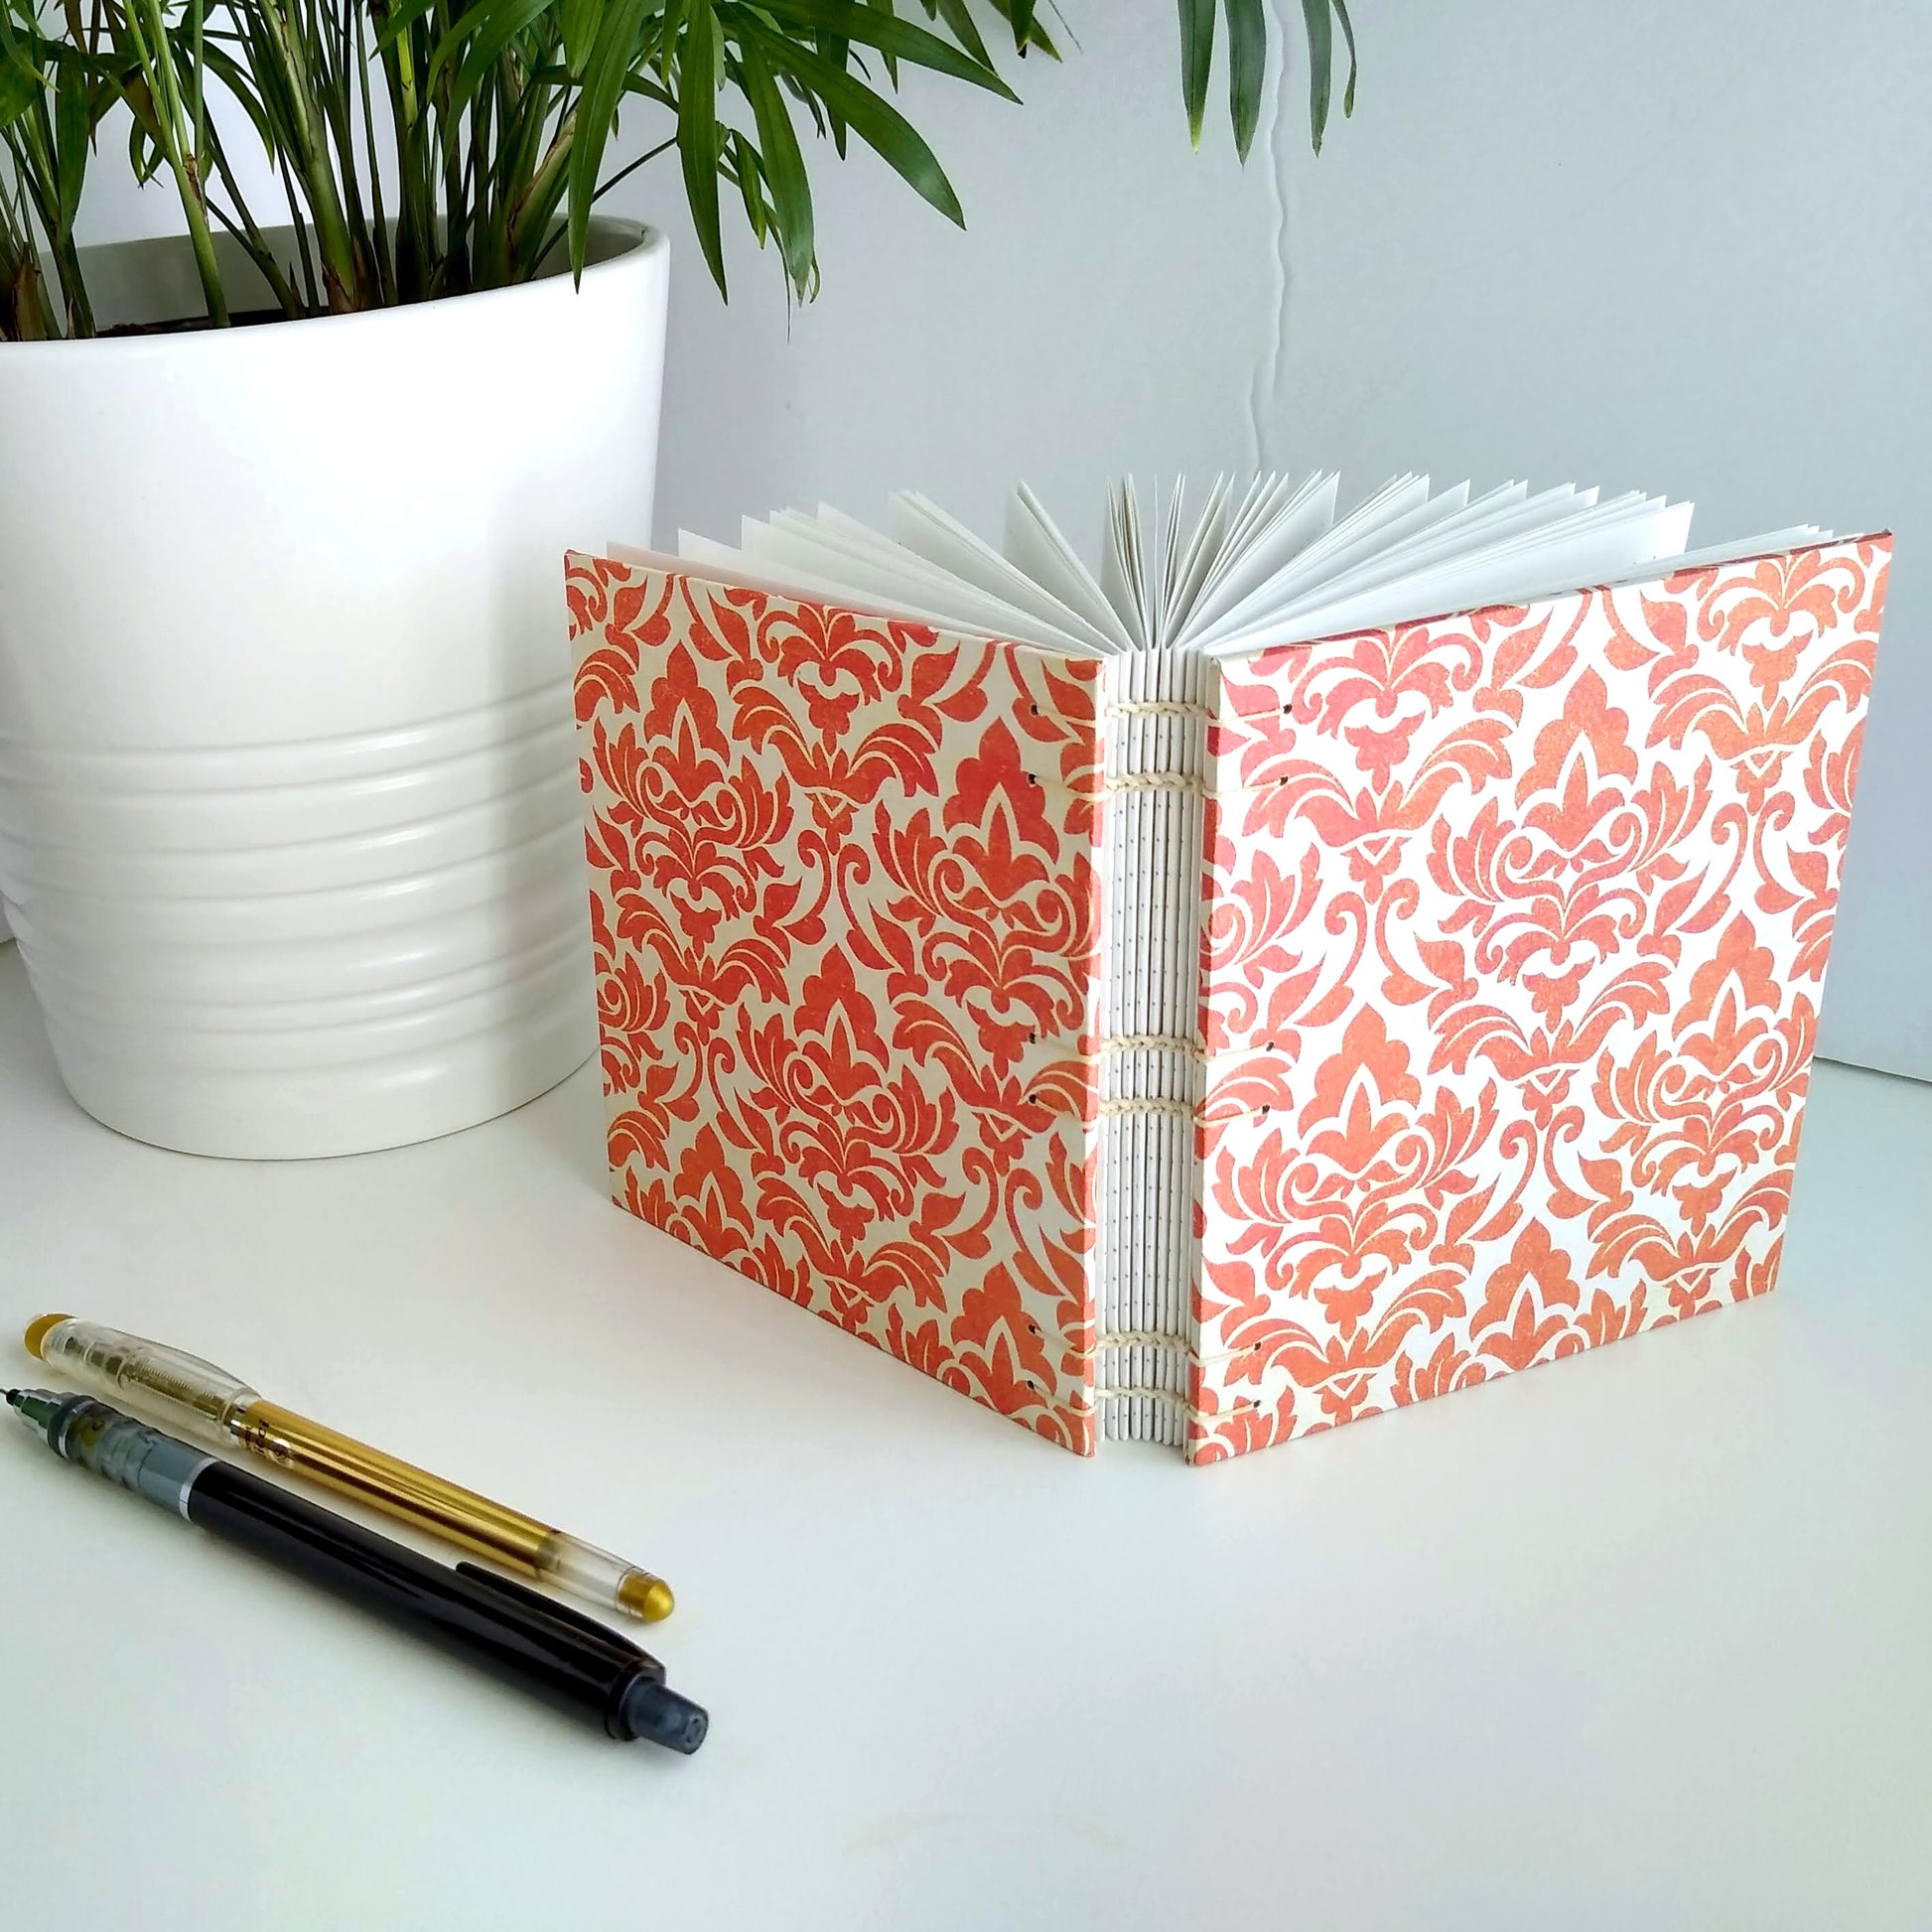 A handmade journal sits upright beside a potted plant, a gold pen, and a black mechanical pencil. The cover of the journal is cream with an orange damask pattern printed across it. It's angled to show the open spine and the cream stitching holding it together.